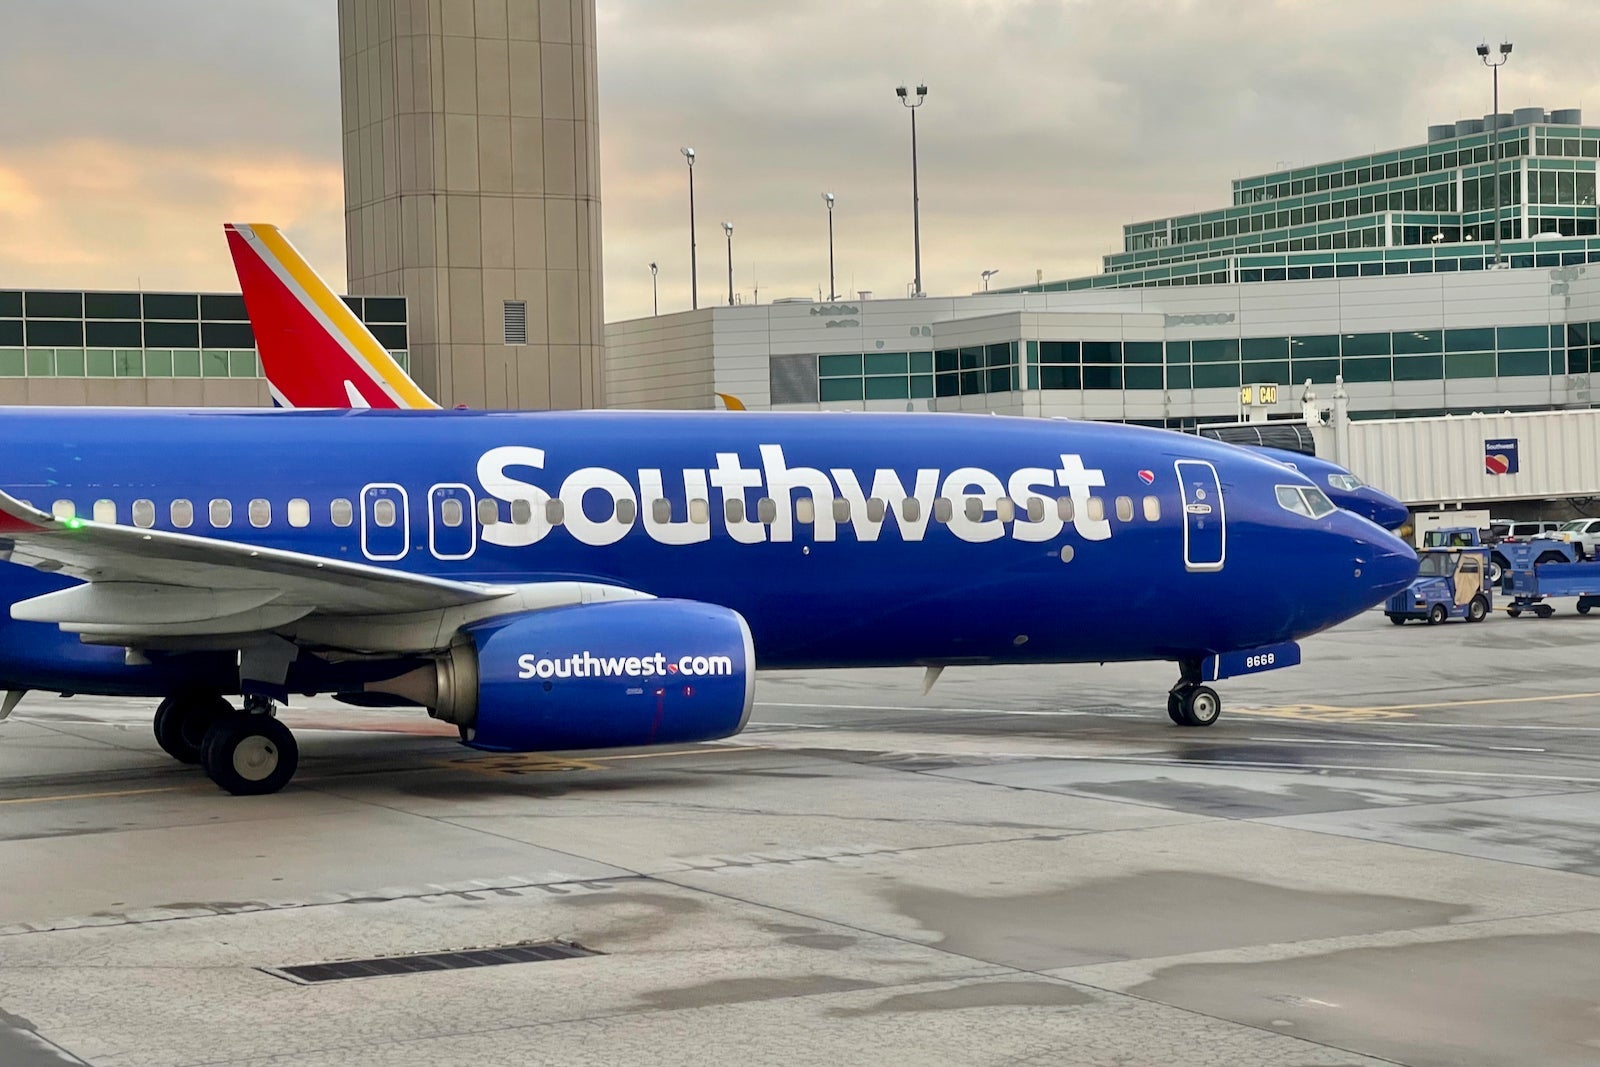 How to get a refund from Southwest after the 2022 holiday travel disruption